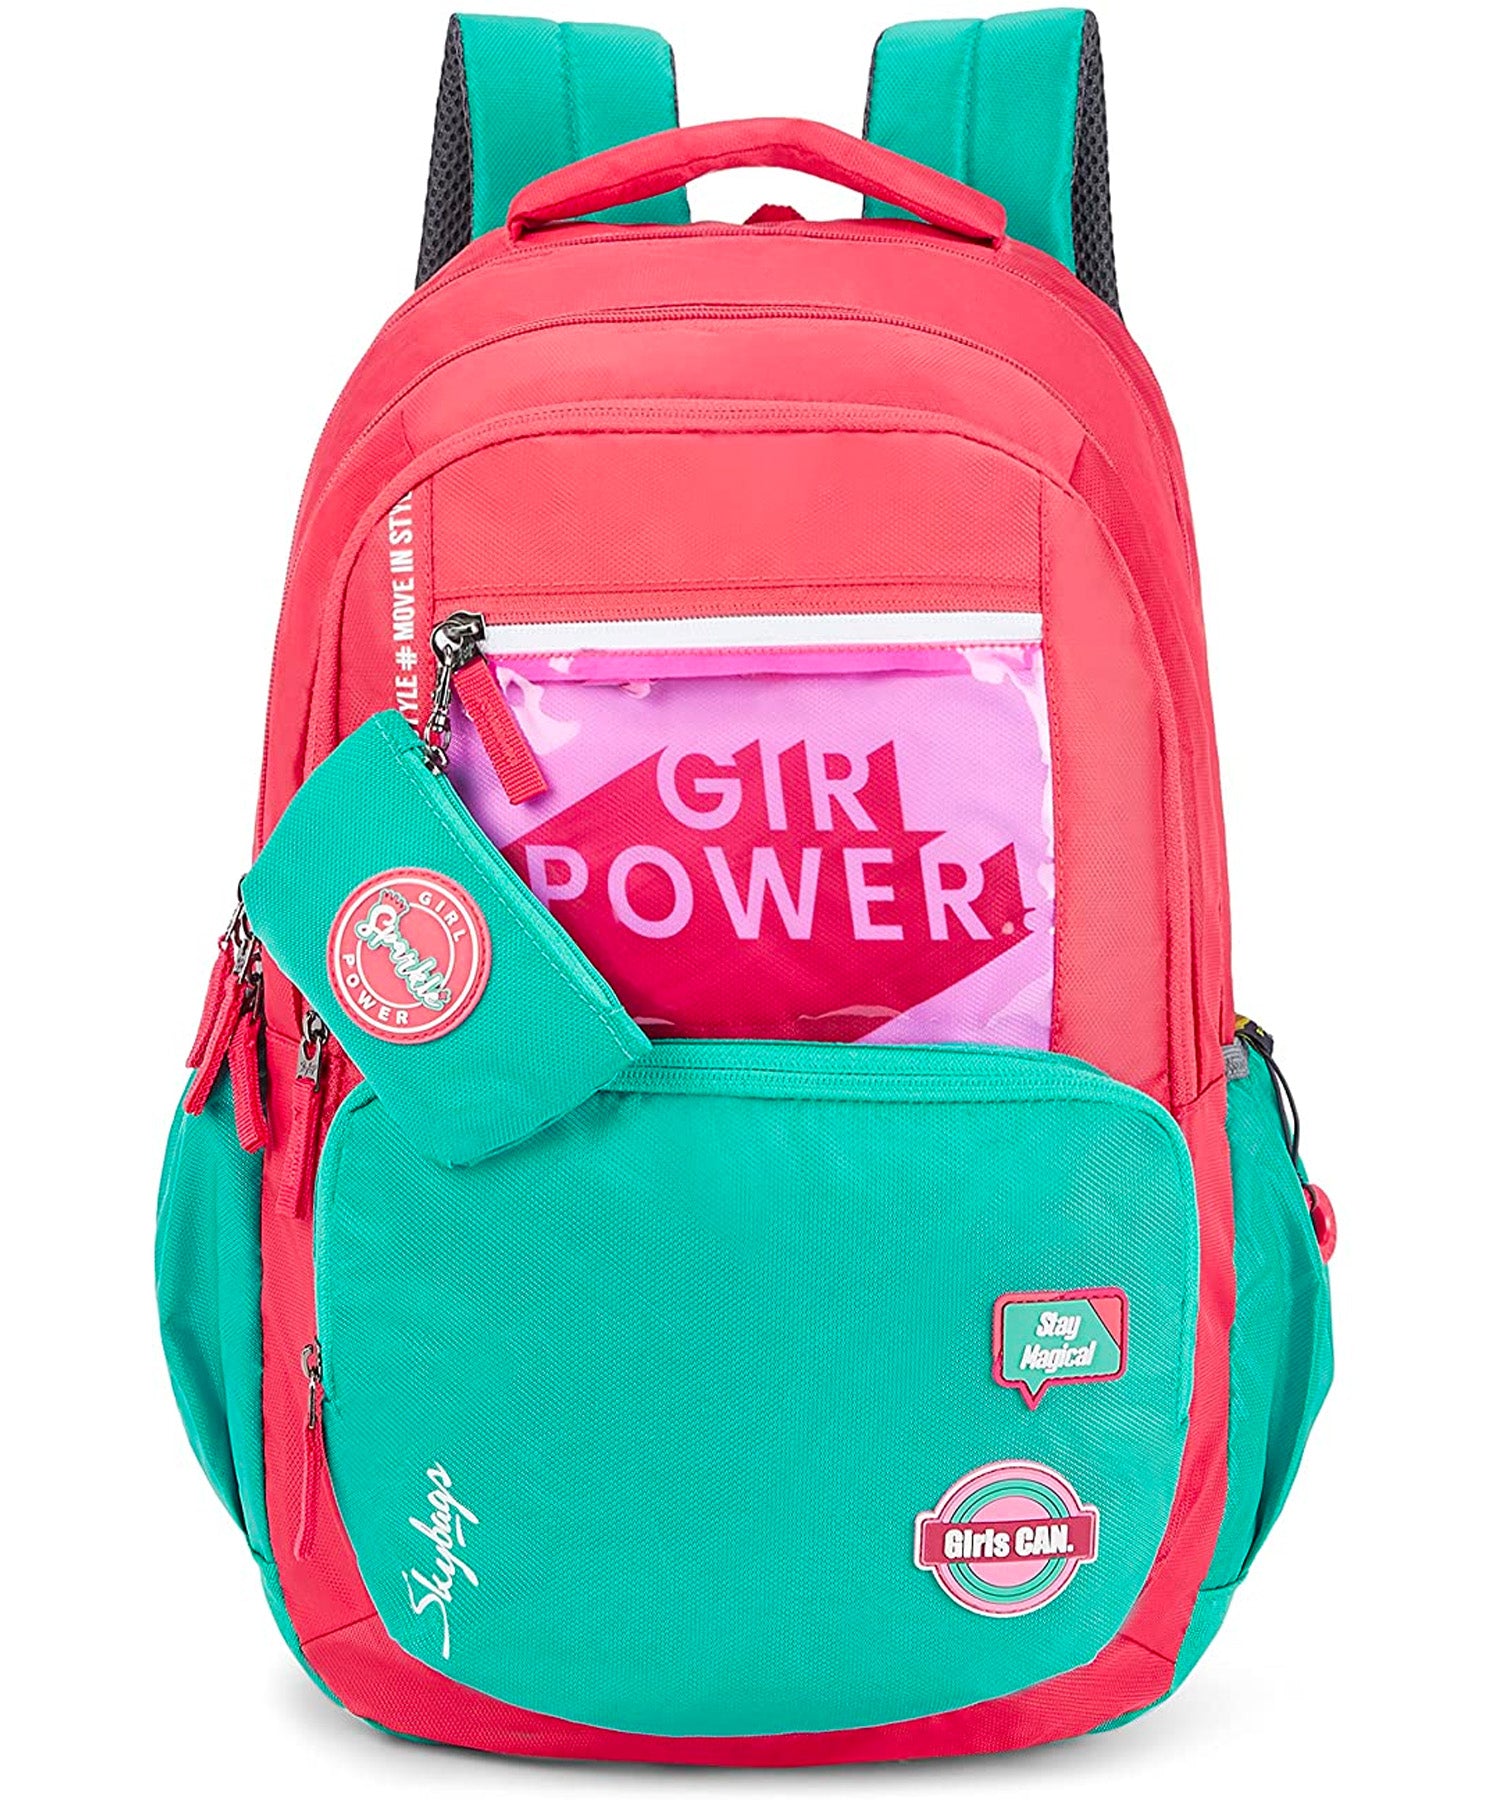 SKYBAGS BACKPACK PINK